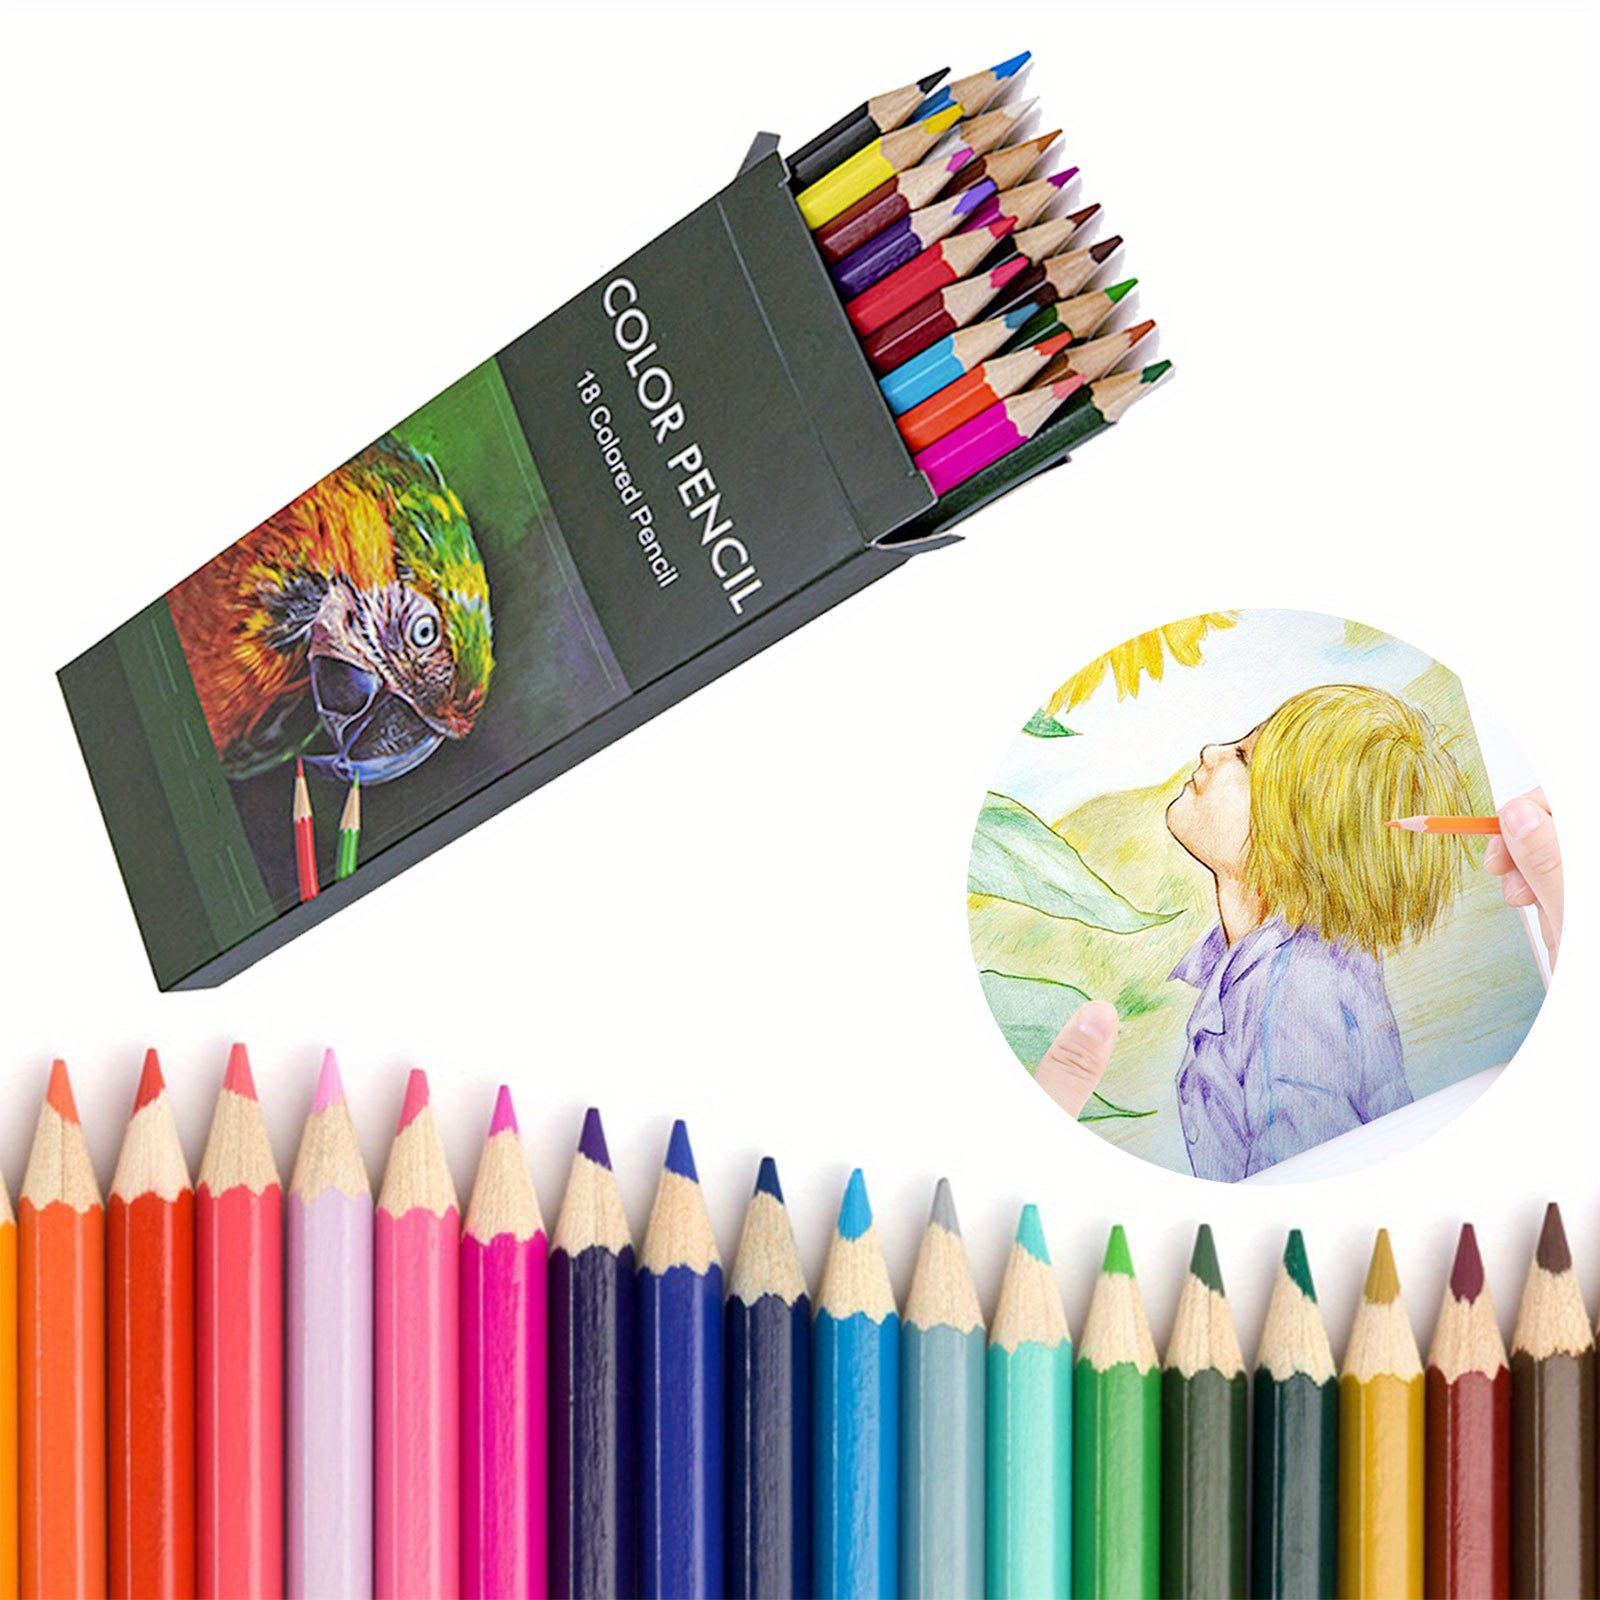 72 Pcs.crayons Set Large Professional Unique Crayons For Drawing With Pencil  Case - Crayons 72 Colors Crayons Adult Set - Drawing Sets Crayons Adults